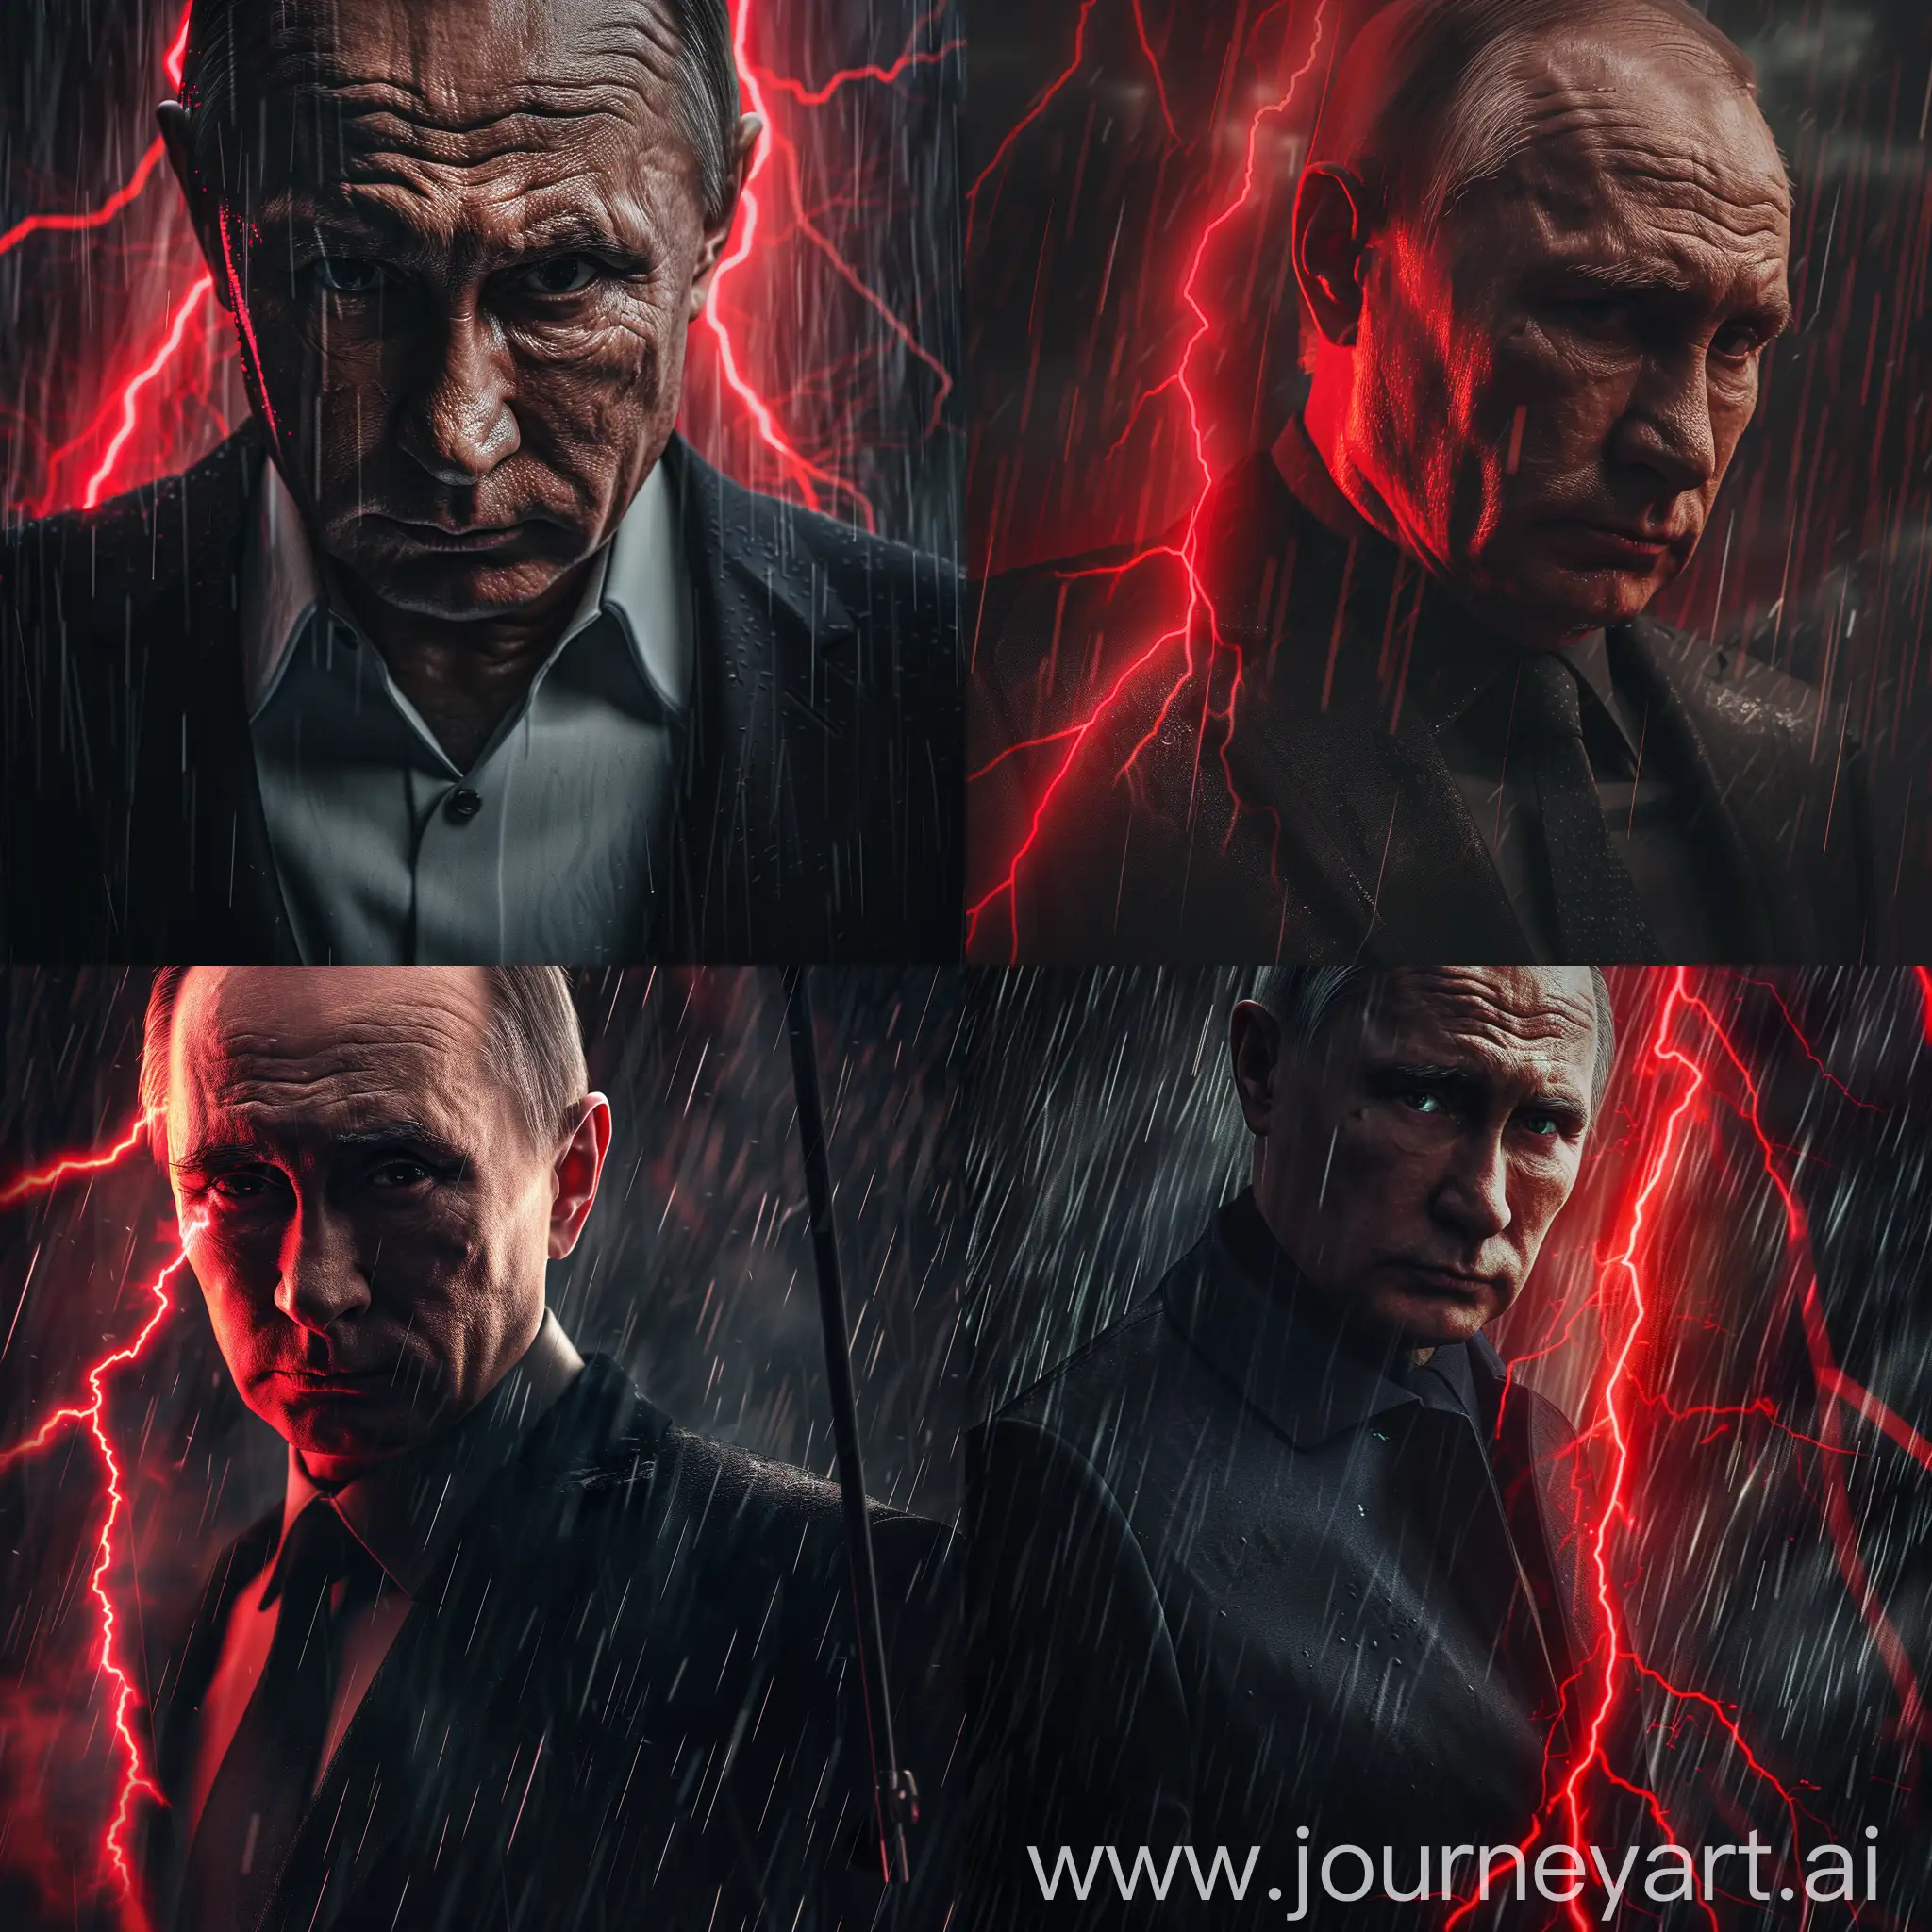 Vladimir-Putin-in-Fierce-Black-Business-Suit-with-Red-Lightning-in-Rainy-Weather